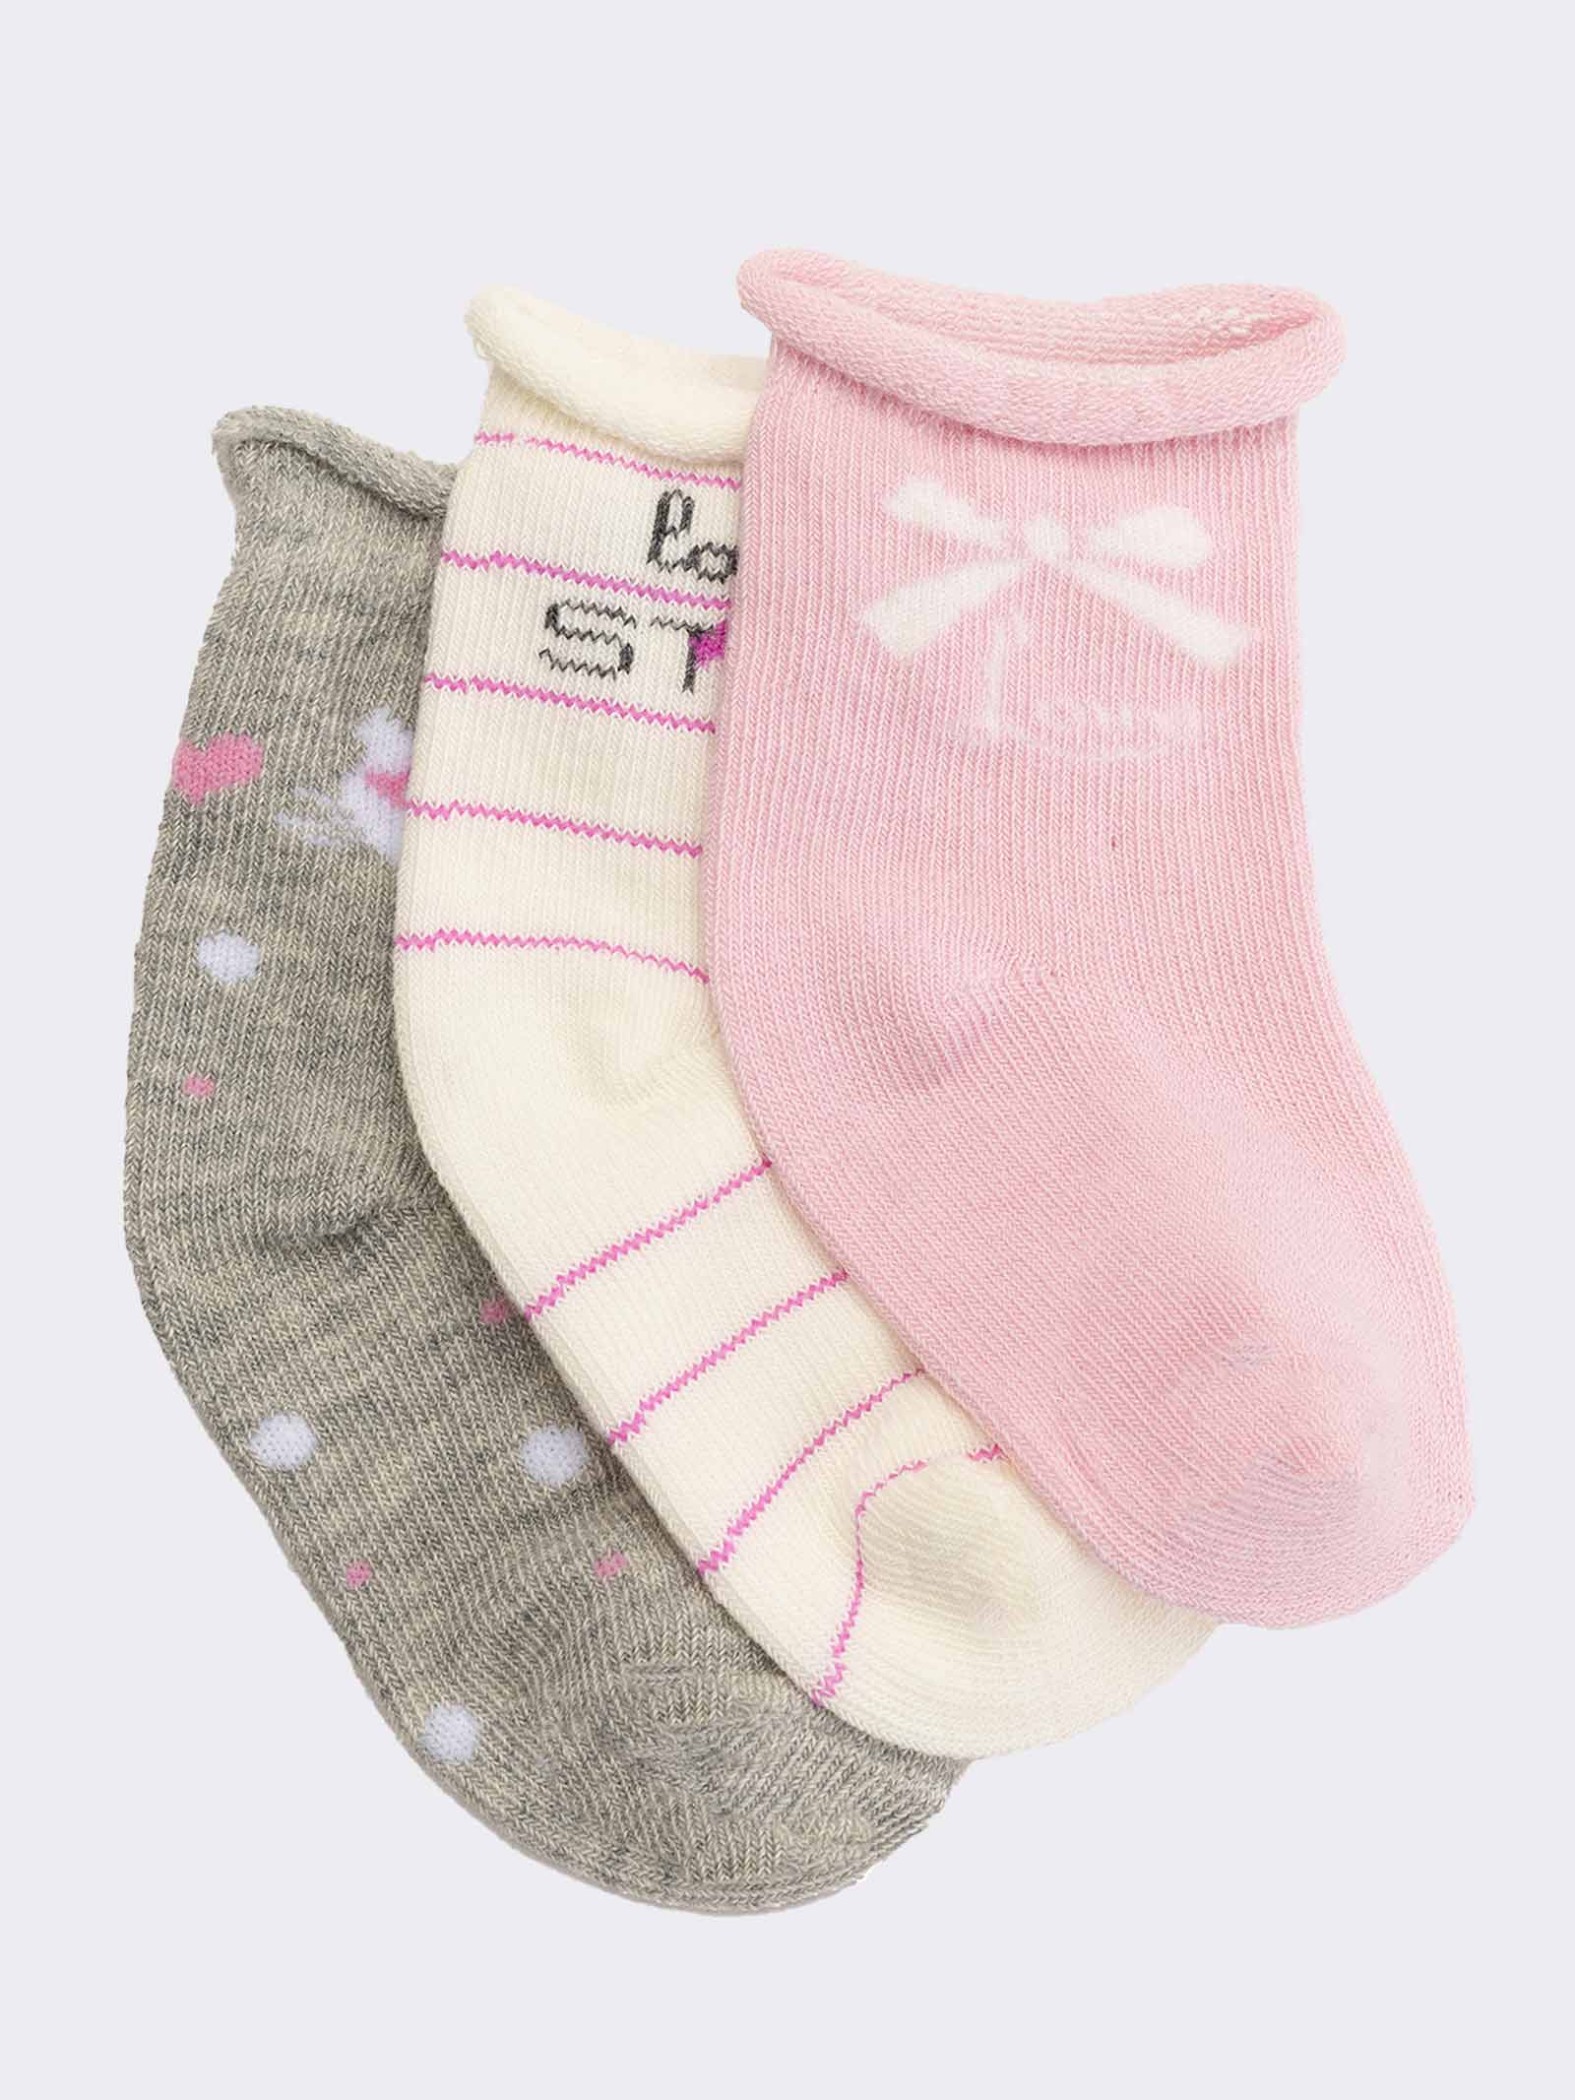 Trio of Happy Love patterned baby socks in warm cotton